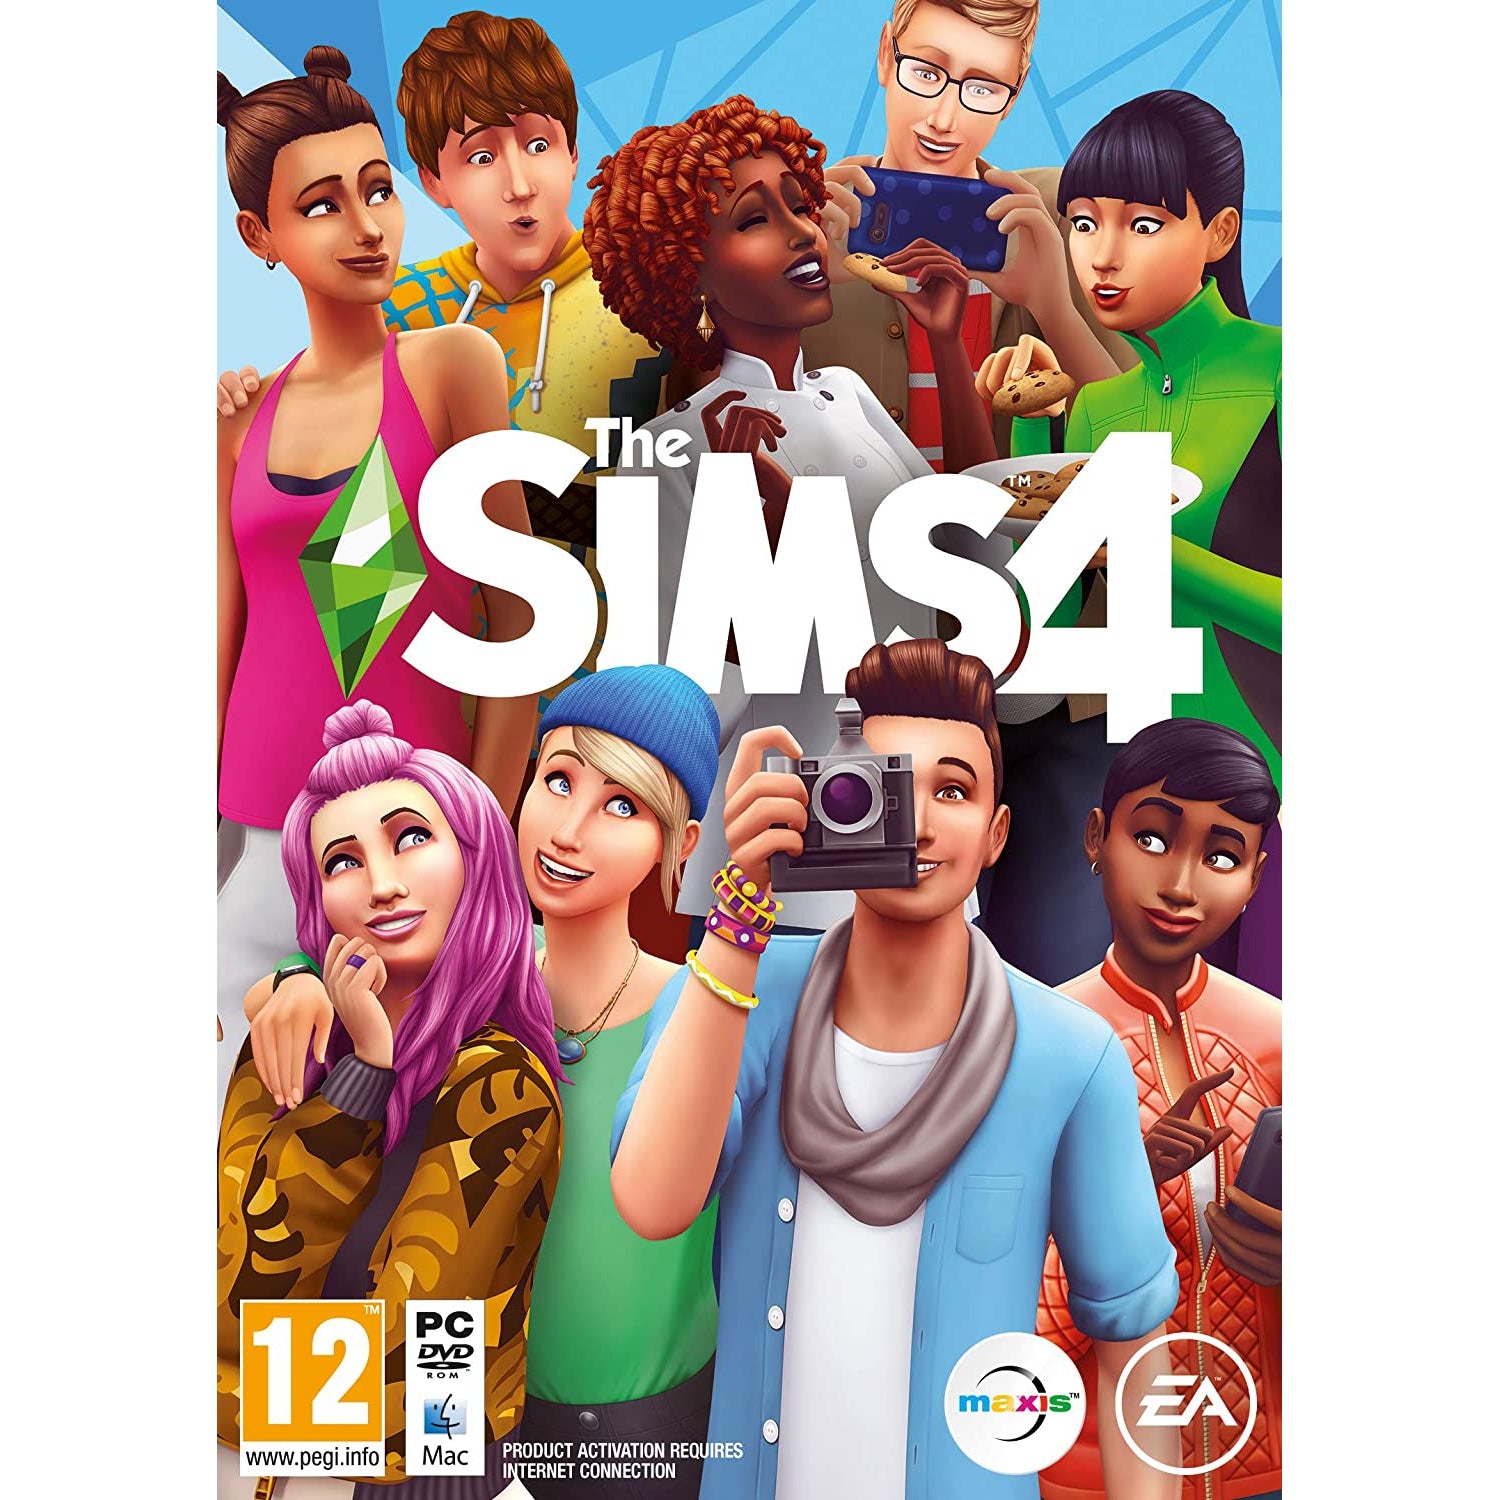 The Sims 4 (PC Disc)